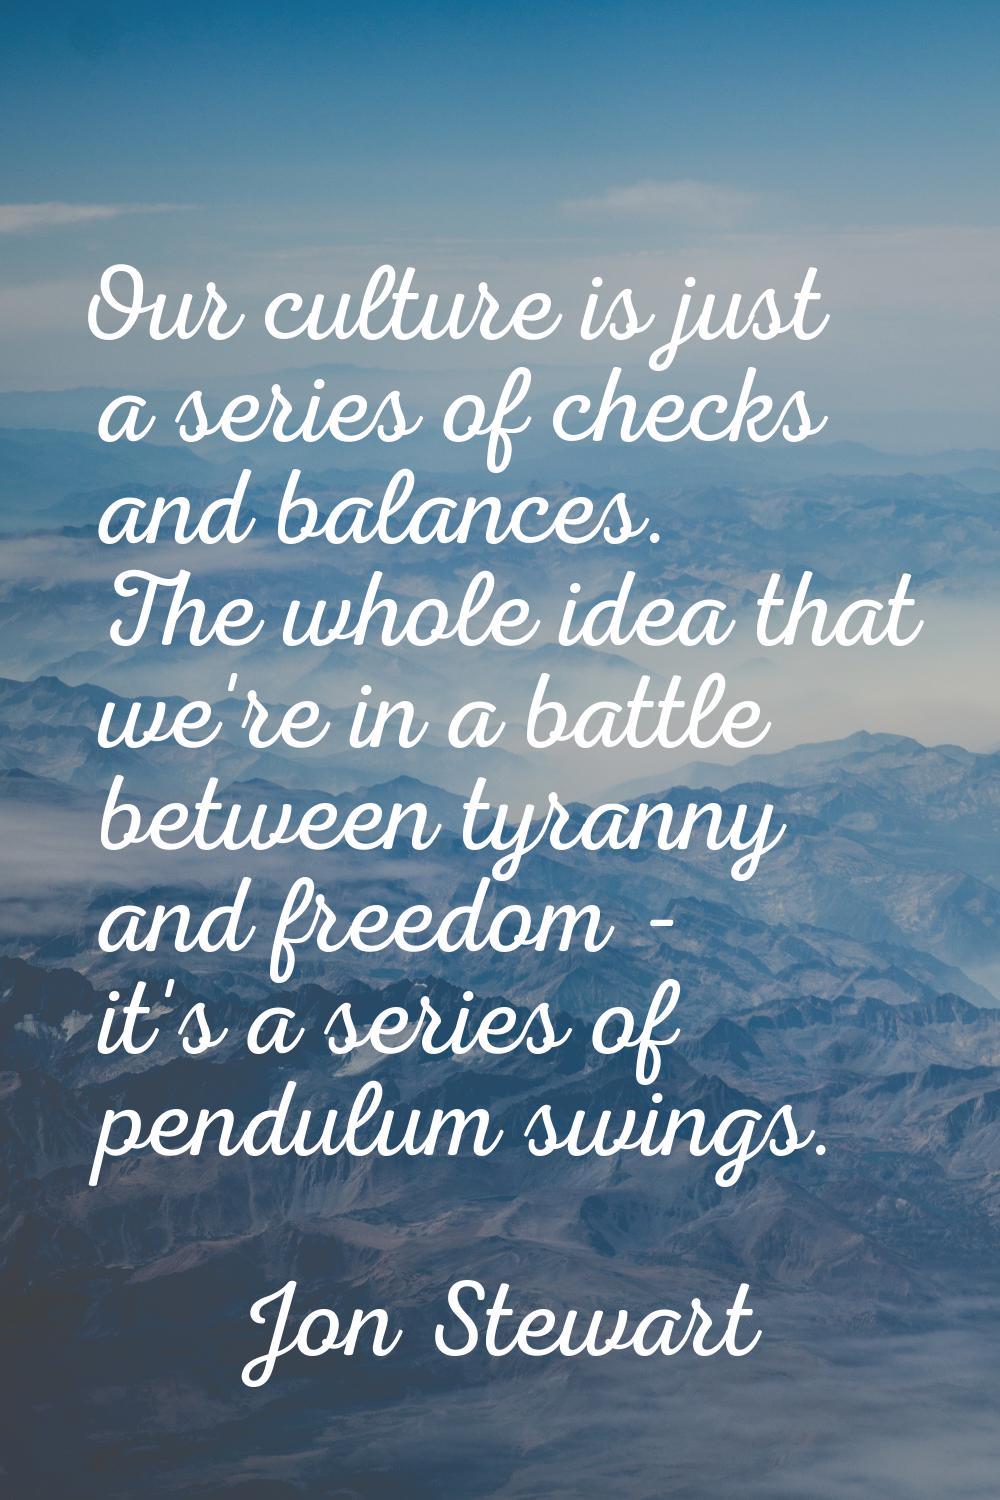 Our culture is just a series of checks and balances. The whole idea that we're in a battle between 